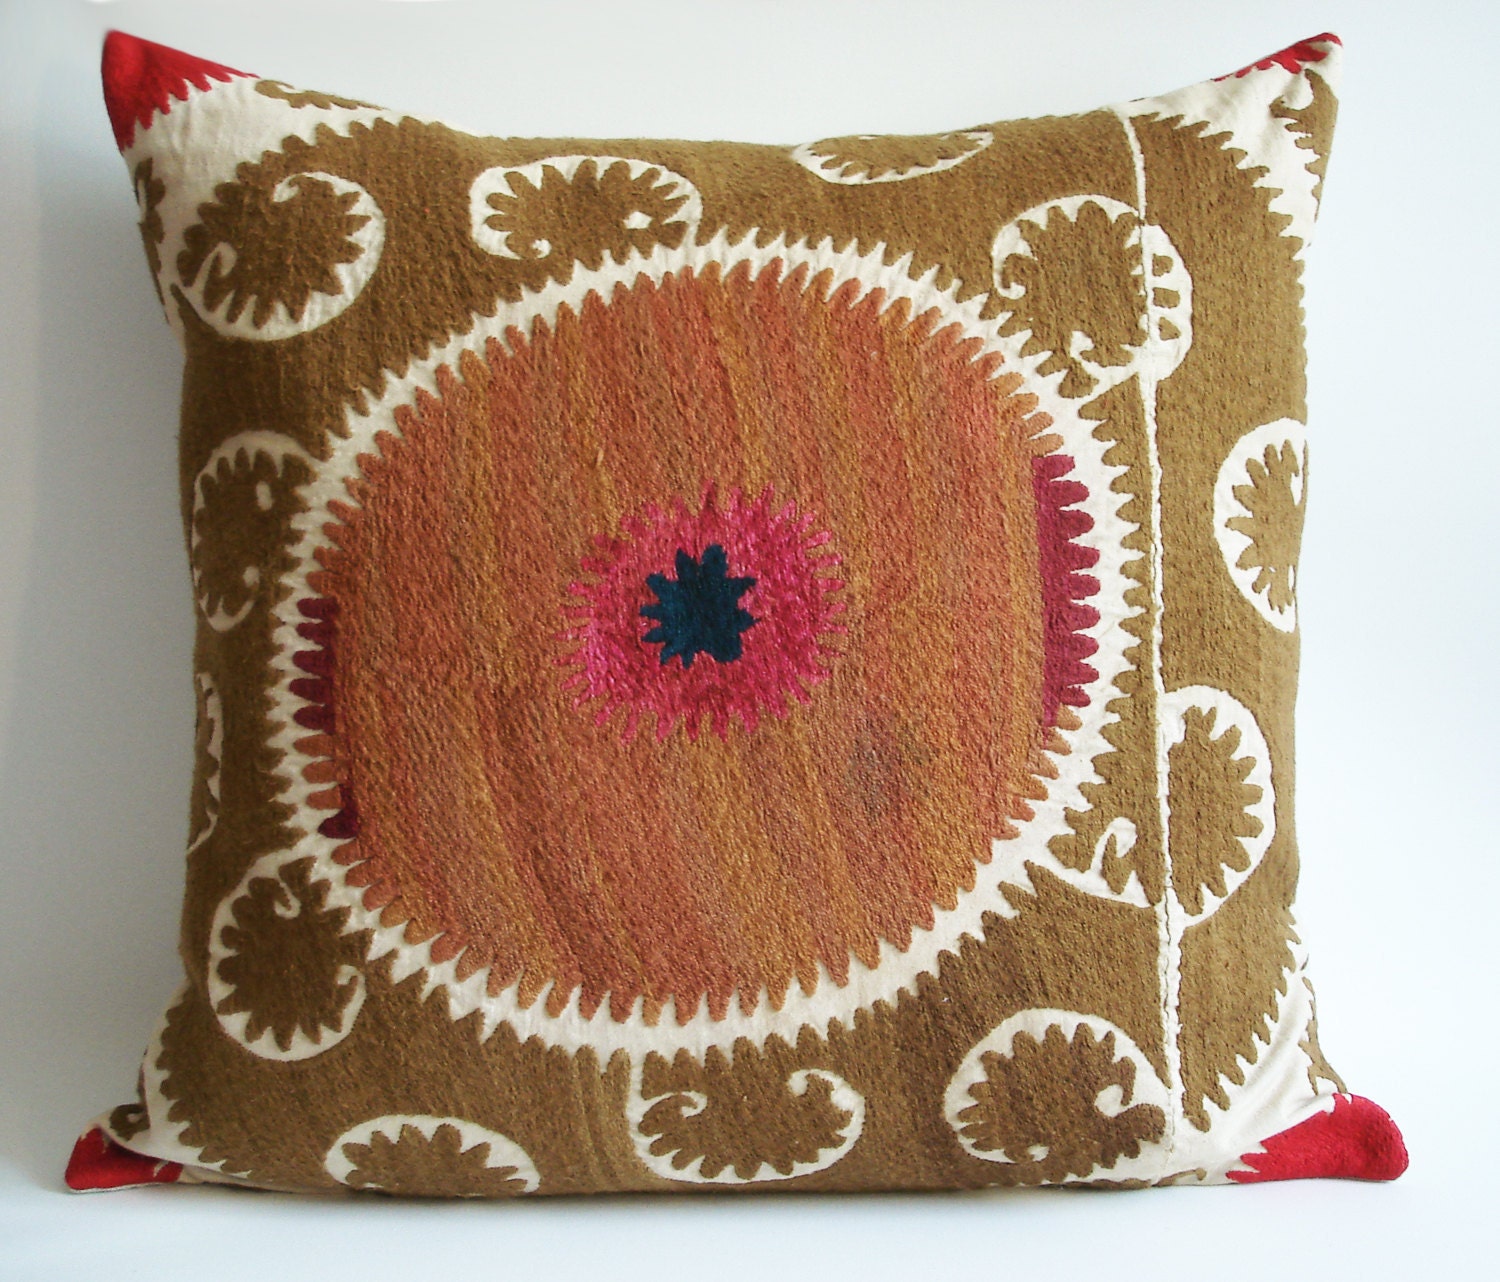 Sukan / Vintage Hand Embroidered Suzani Pillow Cover - 22x22